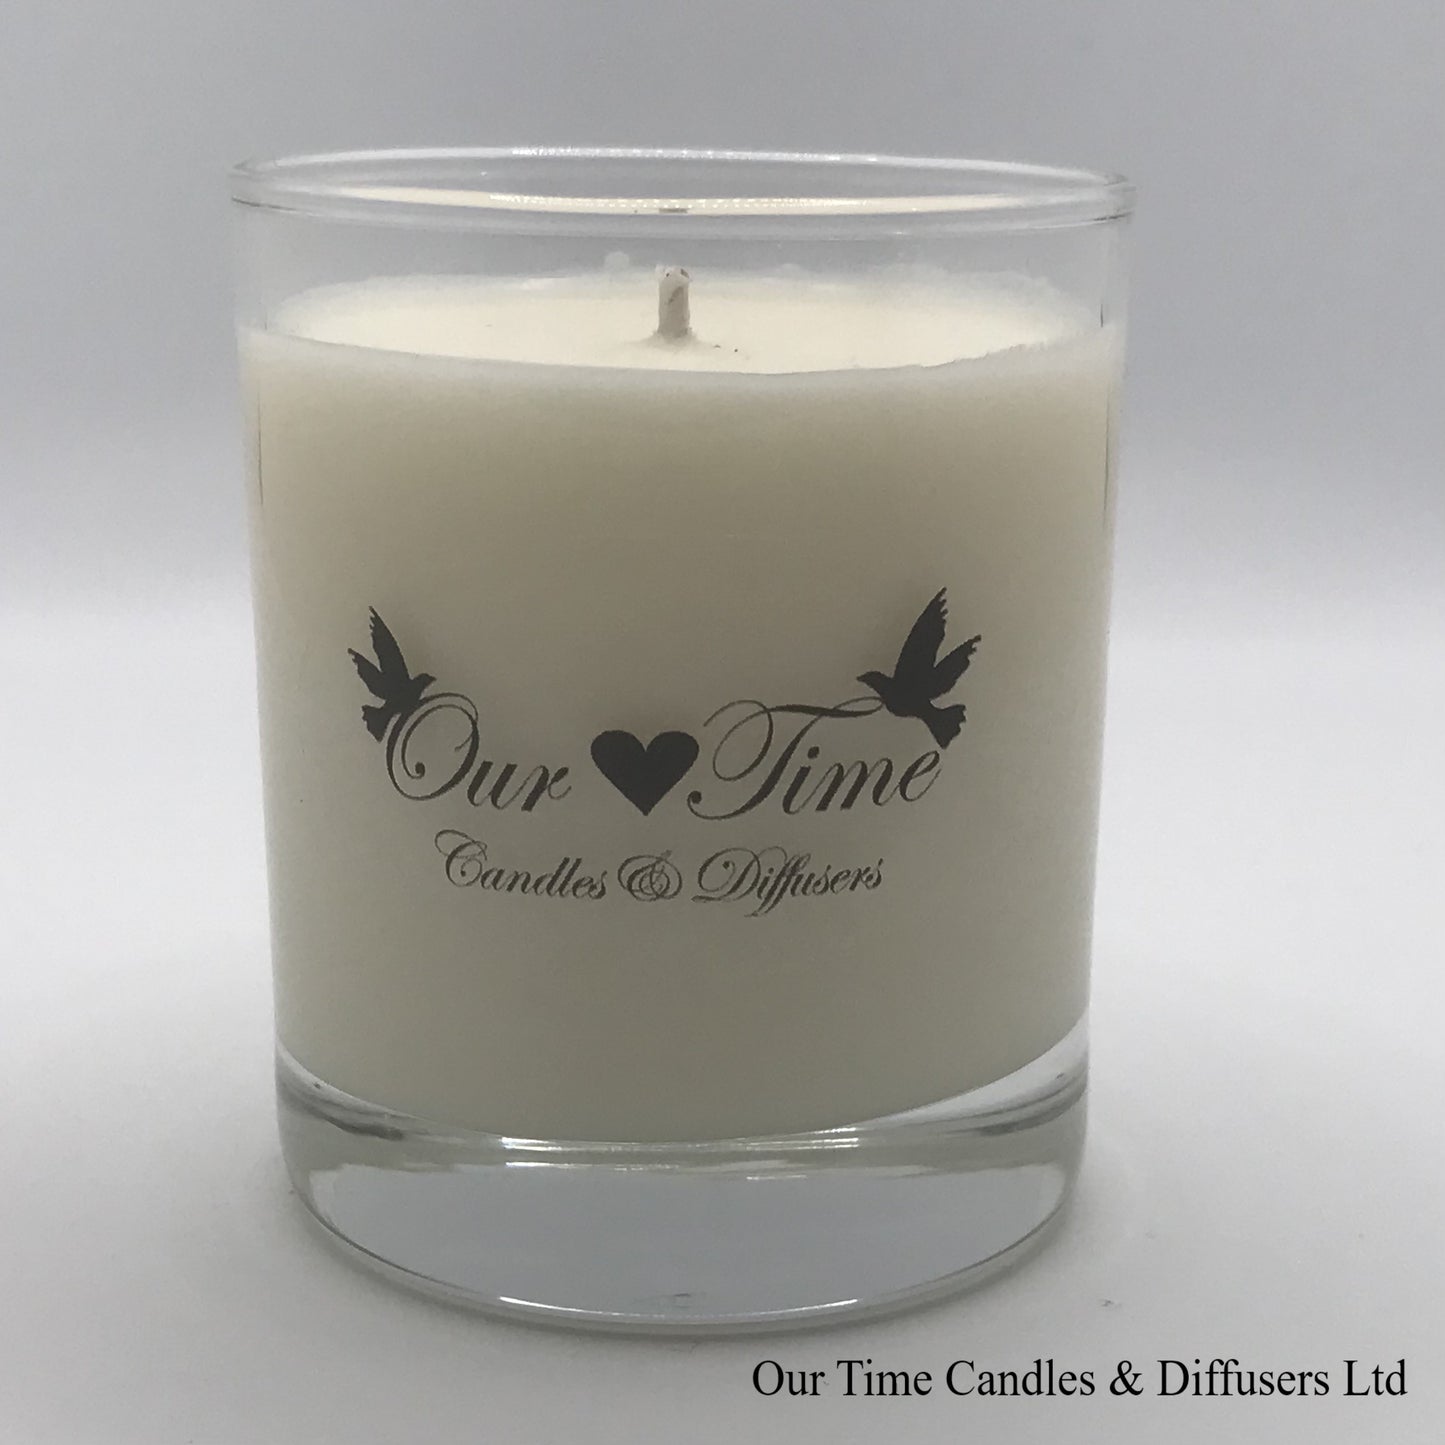 Tropical Fruit scented wax filled soy candle medium